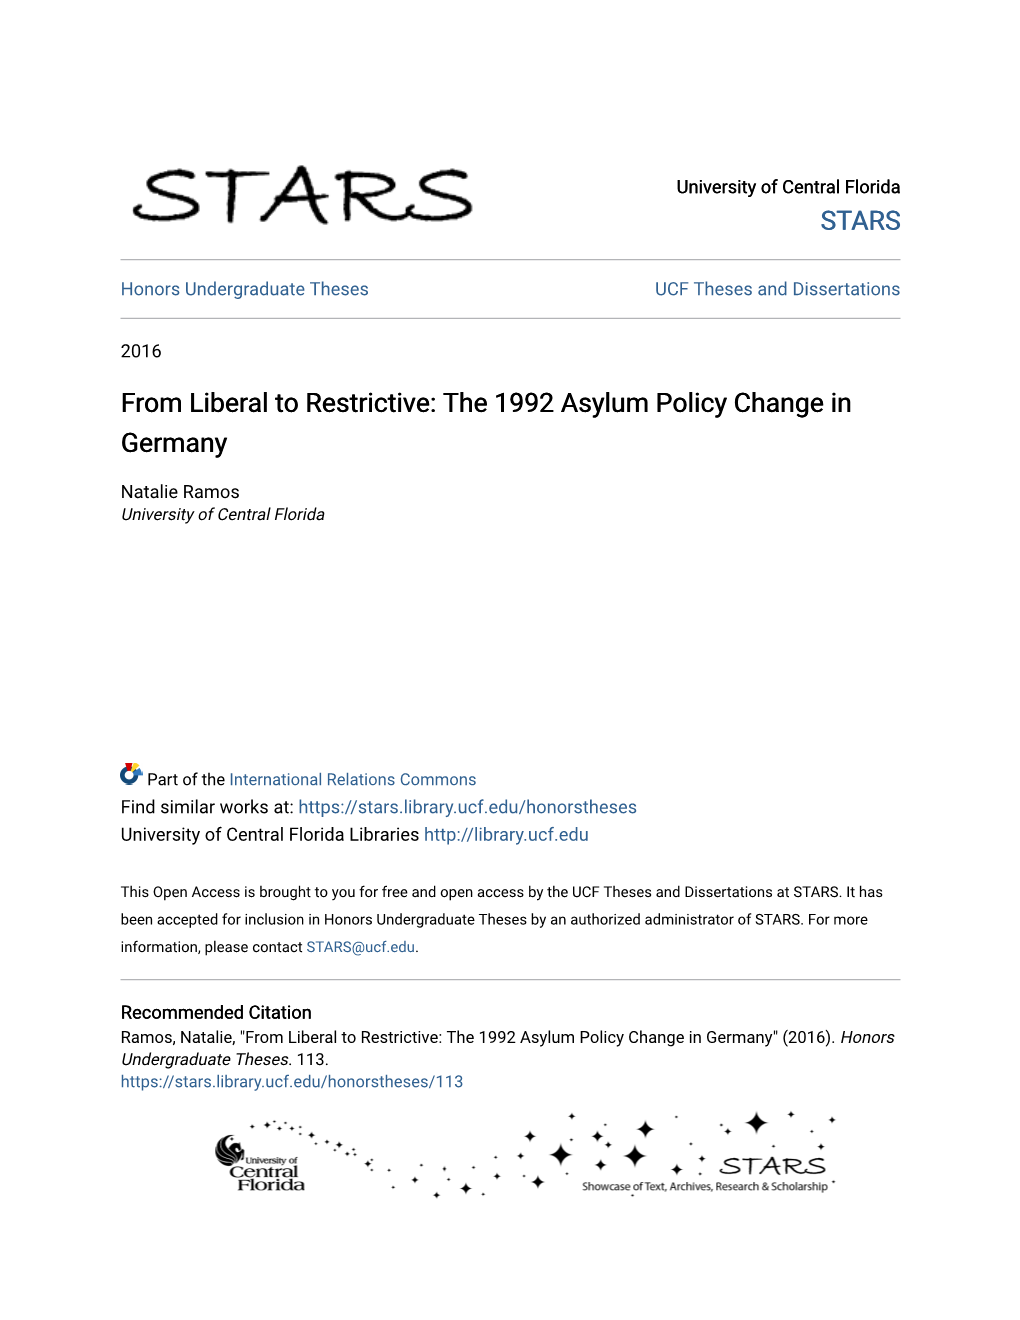 The 1992 Asylum Policy Change in Germany